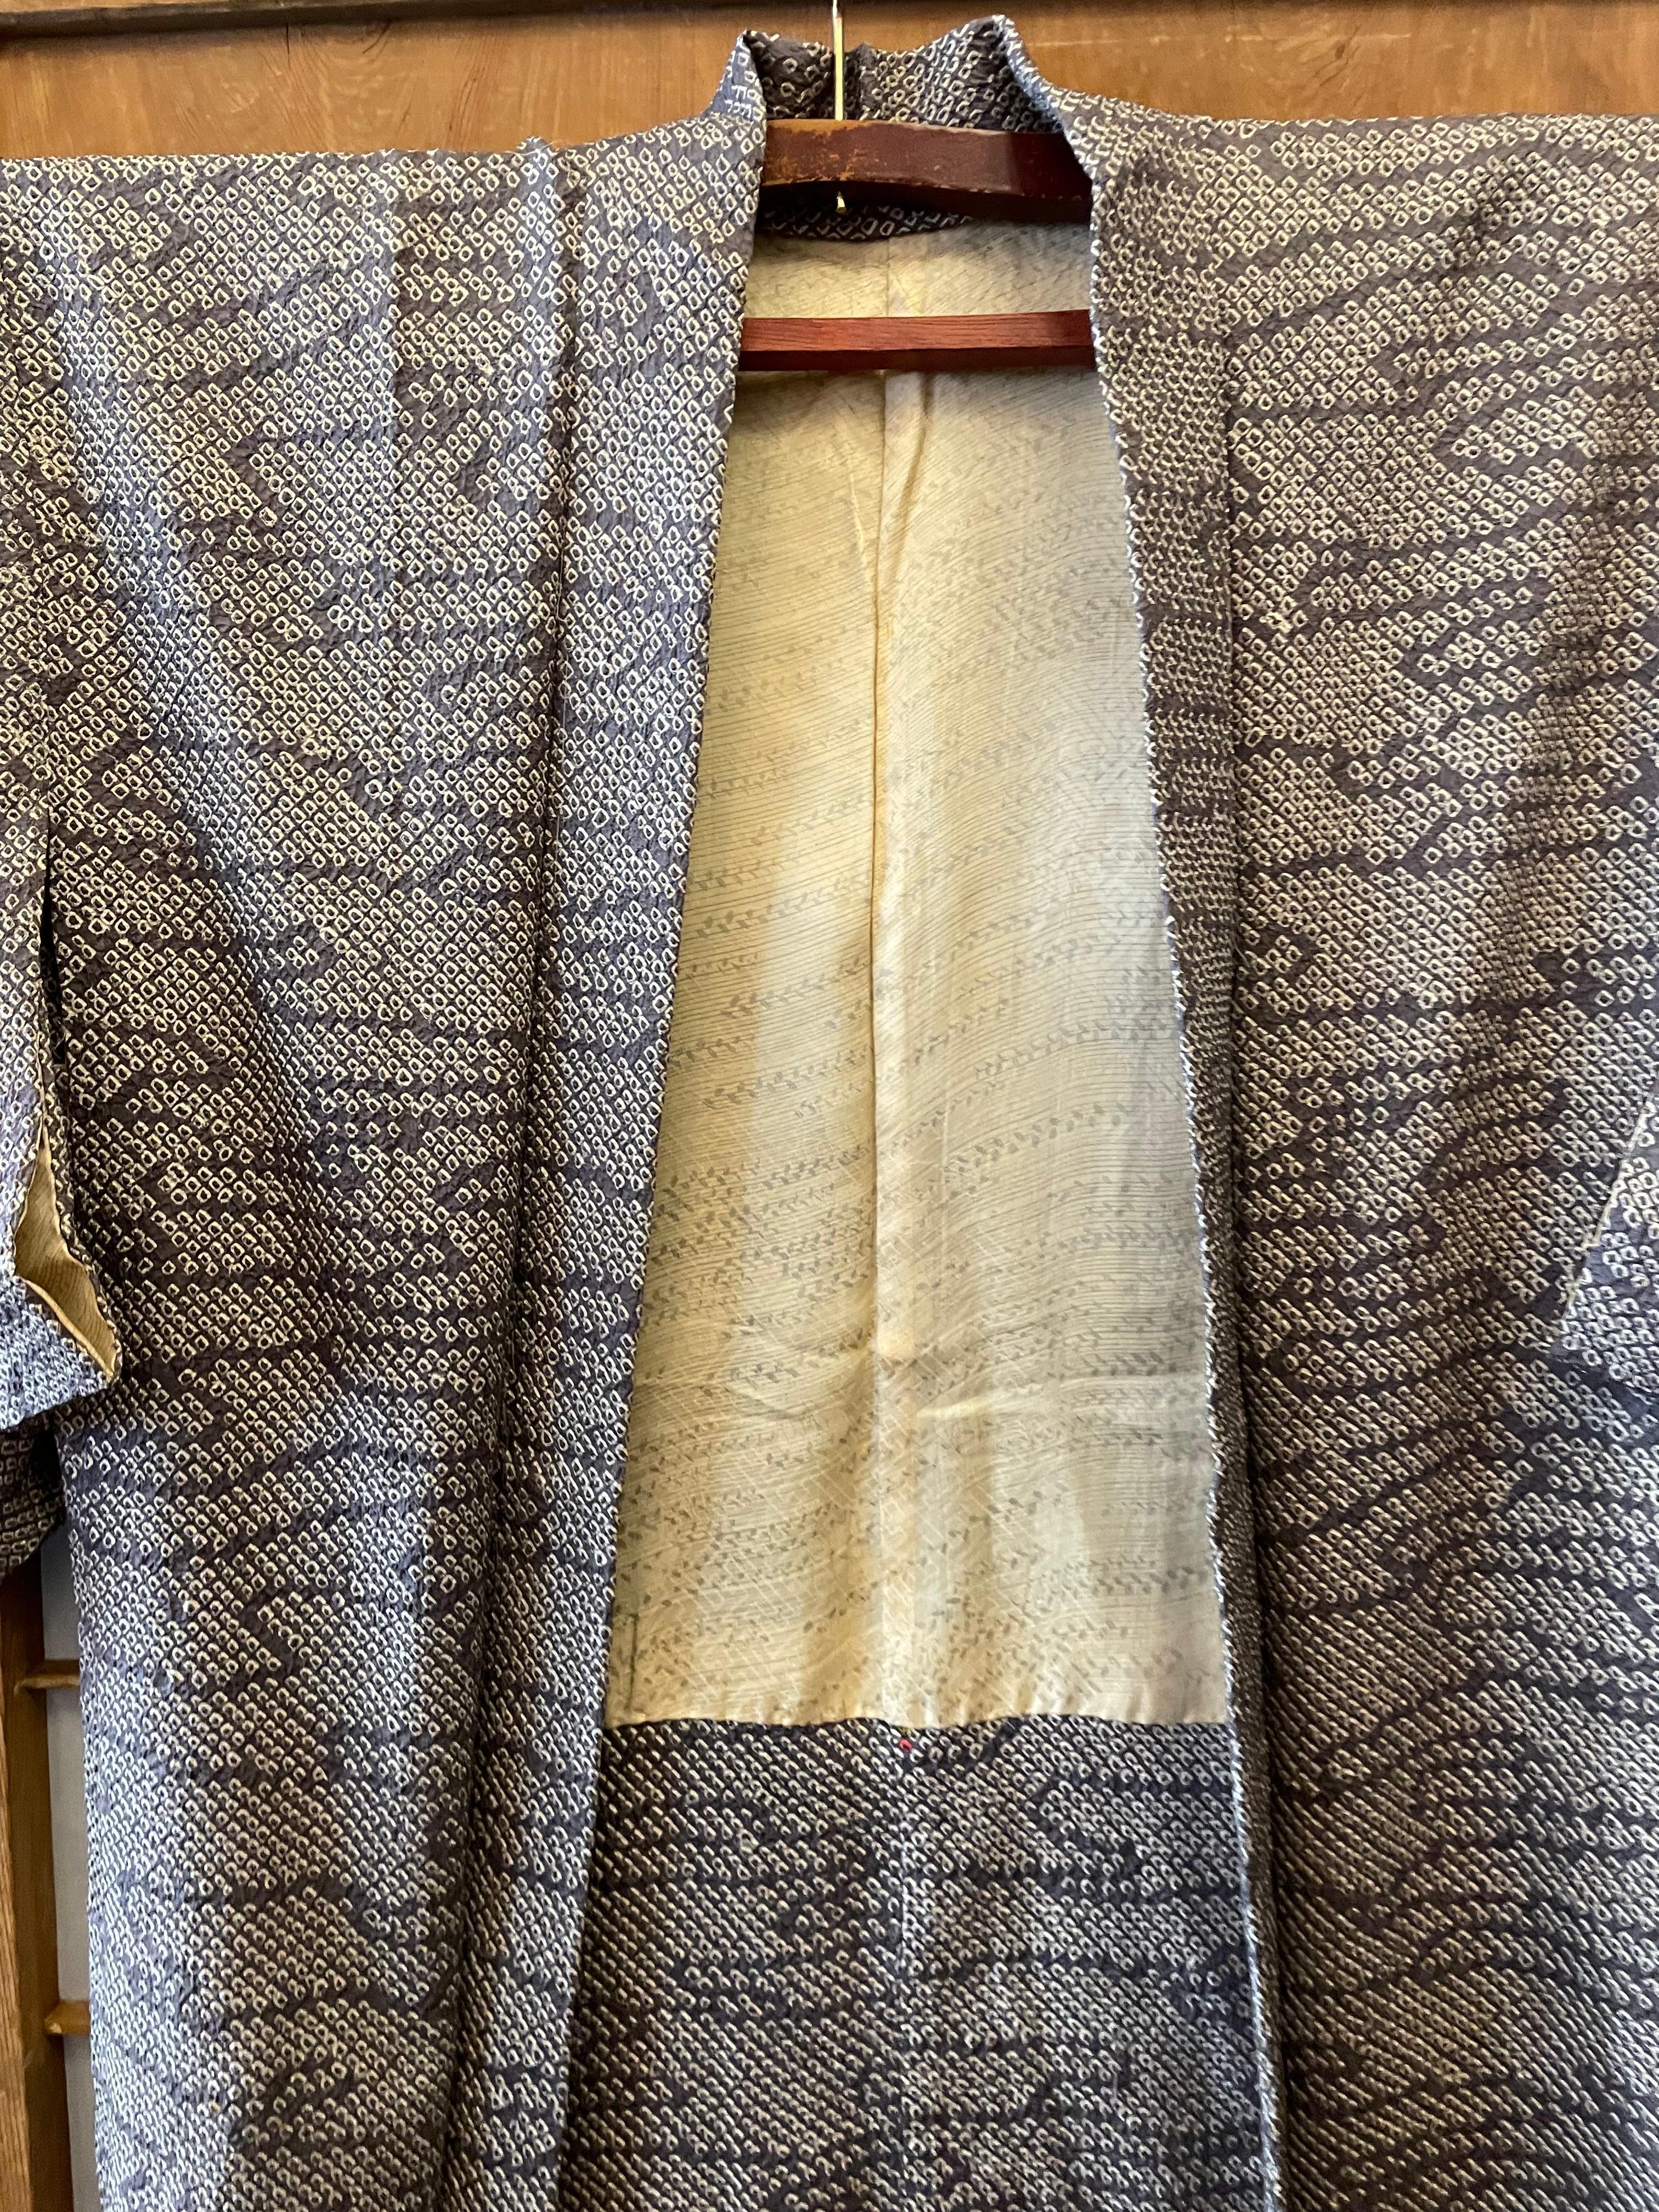 This is a silk jacket which was made in Japan. This kind of jacket is called 'Haori' in Japanese.
It was made in Showa era around 1970s. This jacket is made with Shibori technique.

Shibori is a Japanese manual tie-dyeing technique, which produces a